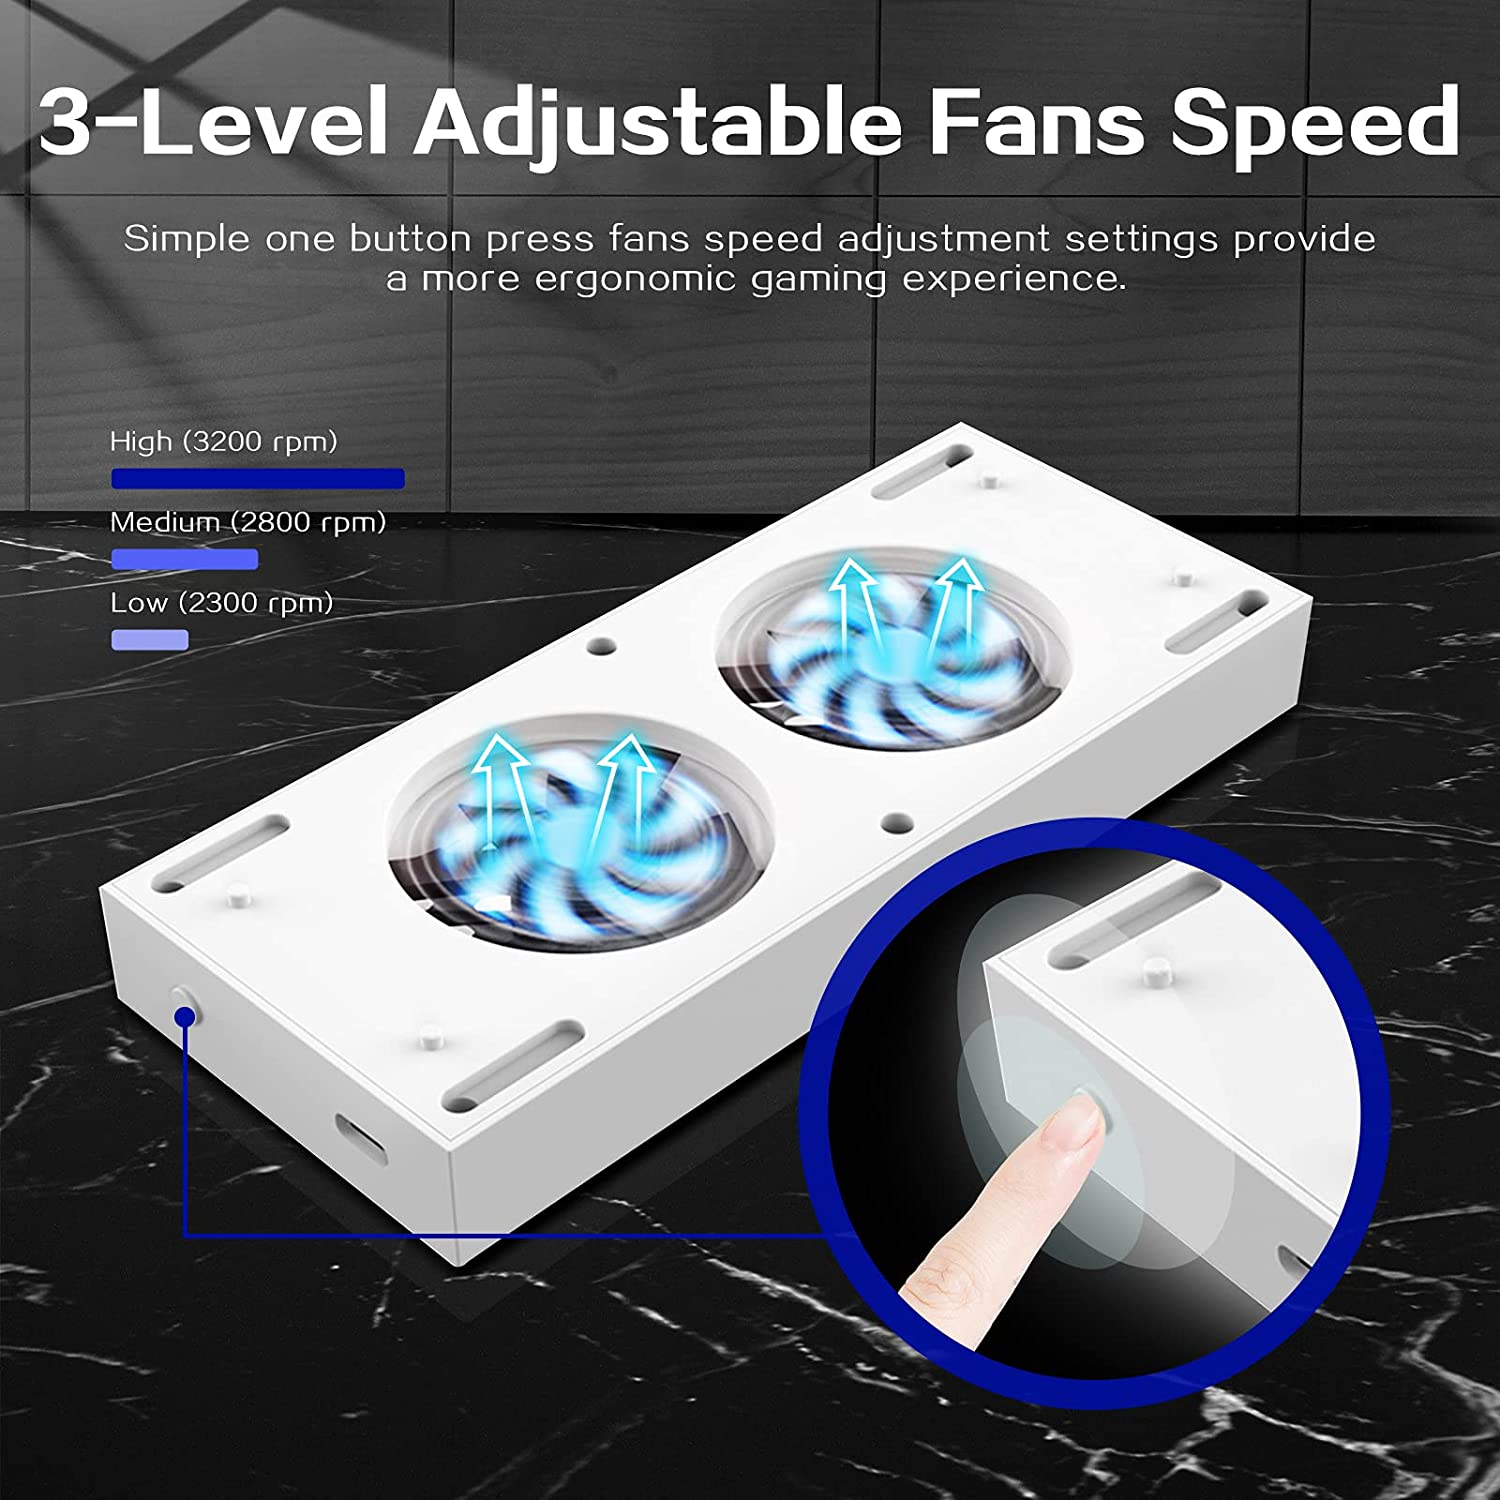 Adjustable fan speed with three settings controlled by a simple button press.